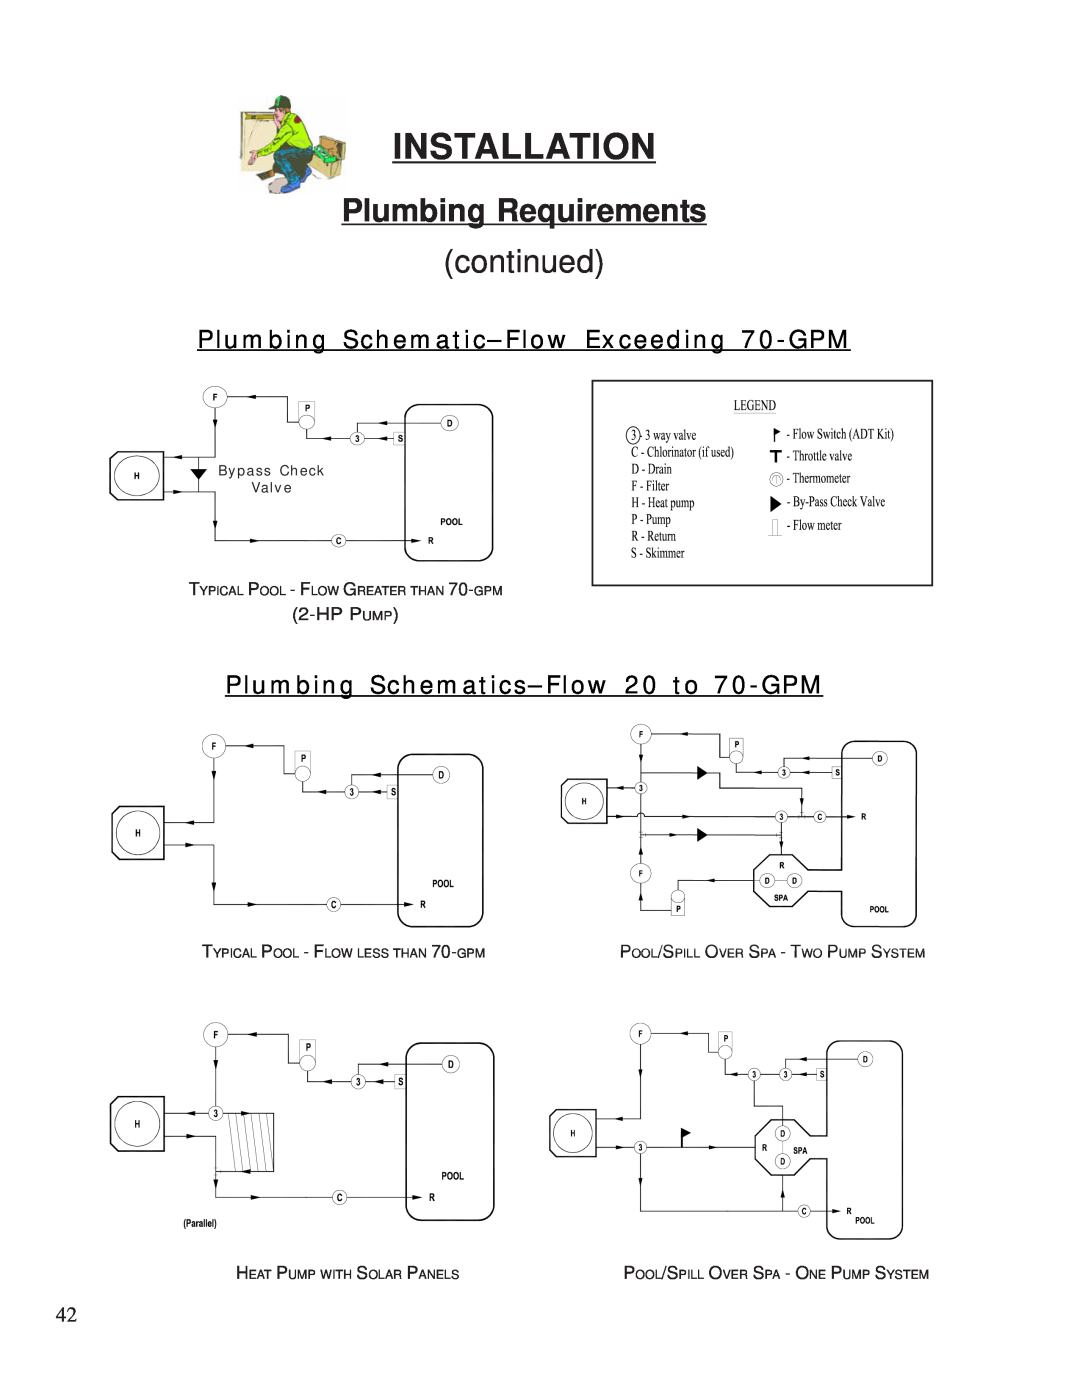 Aquacal 155, 120 Installation, Plumbing Requirements, continued, Plumbing Schematic–FlowExceeding 70-GPM, Hppump 